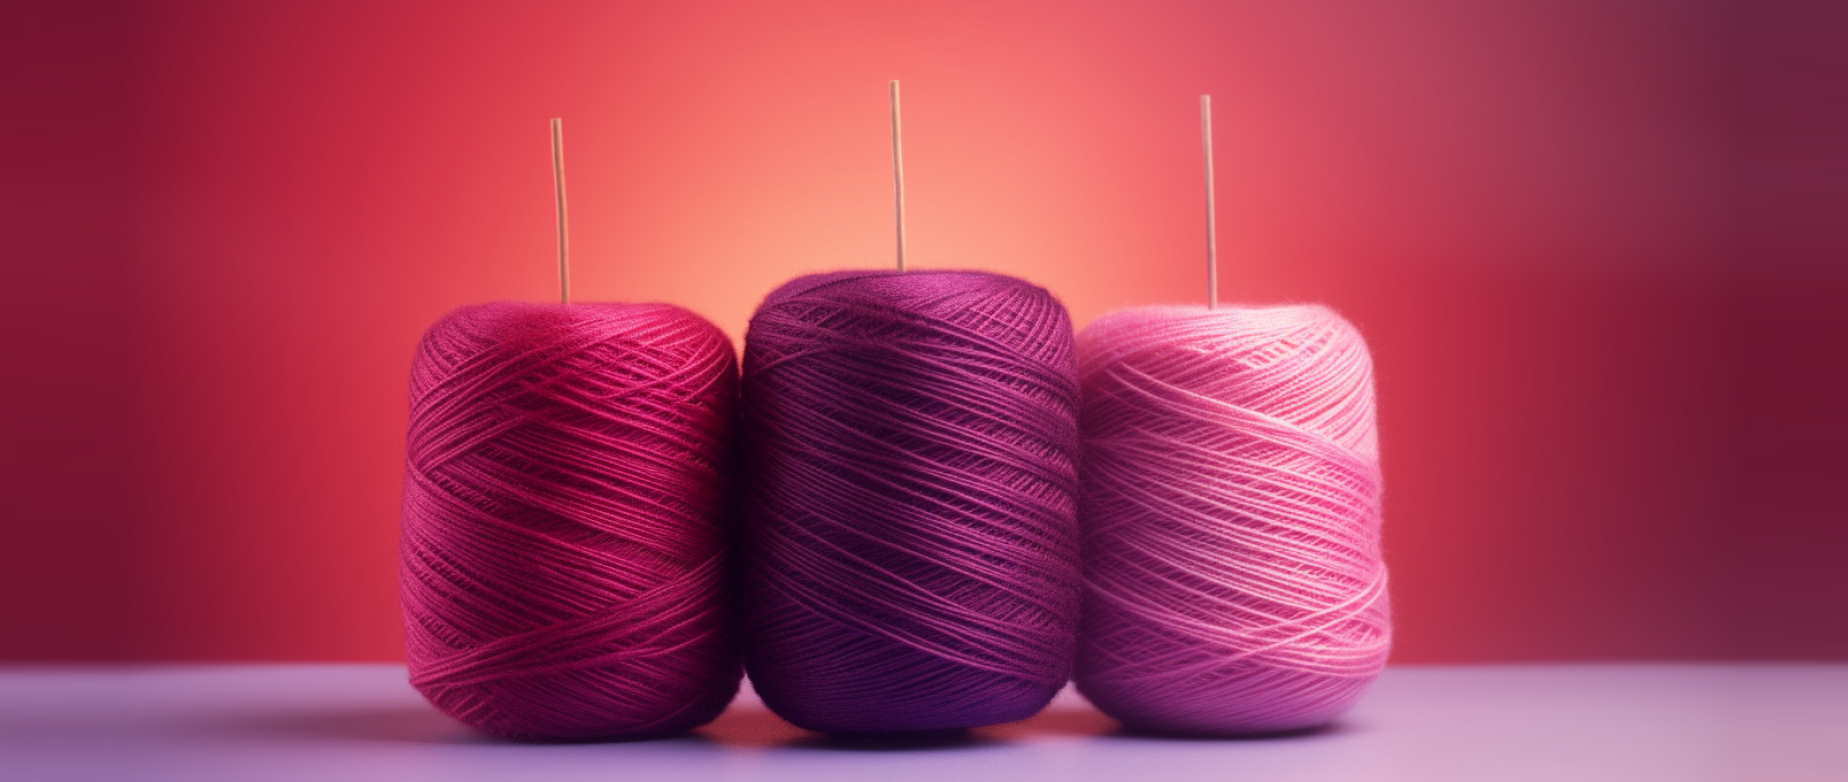 three skeins of yarn: how to start a craft business